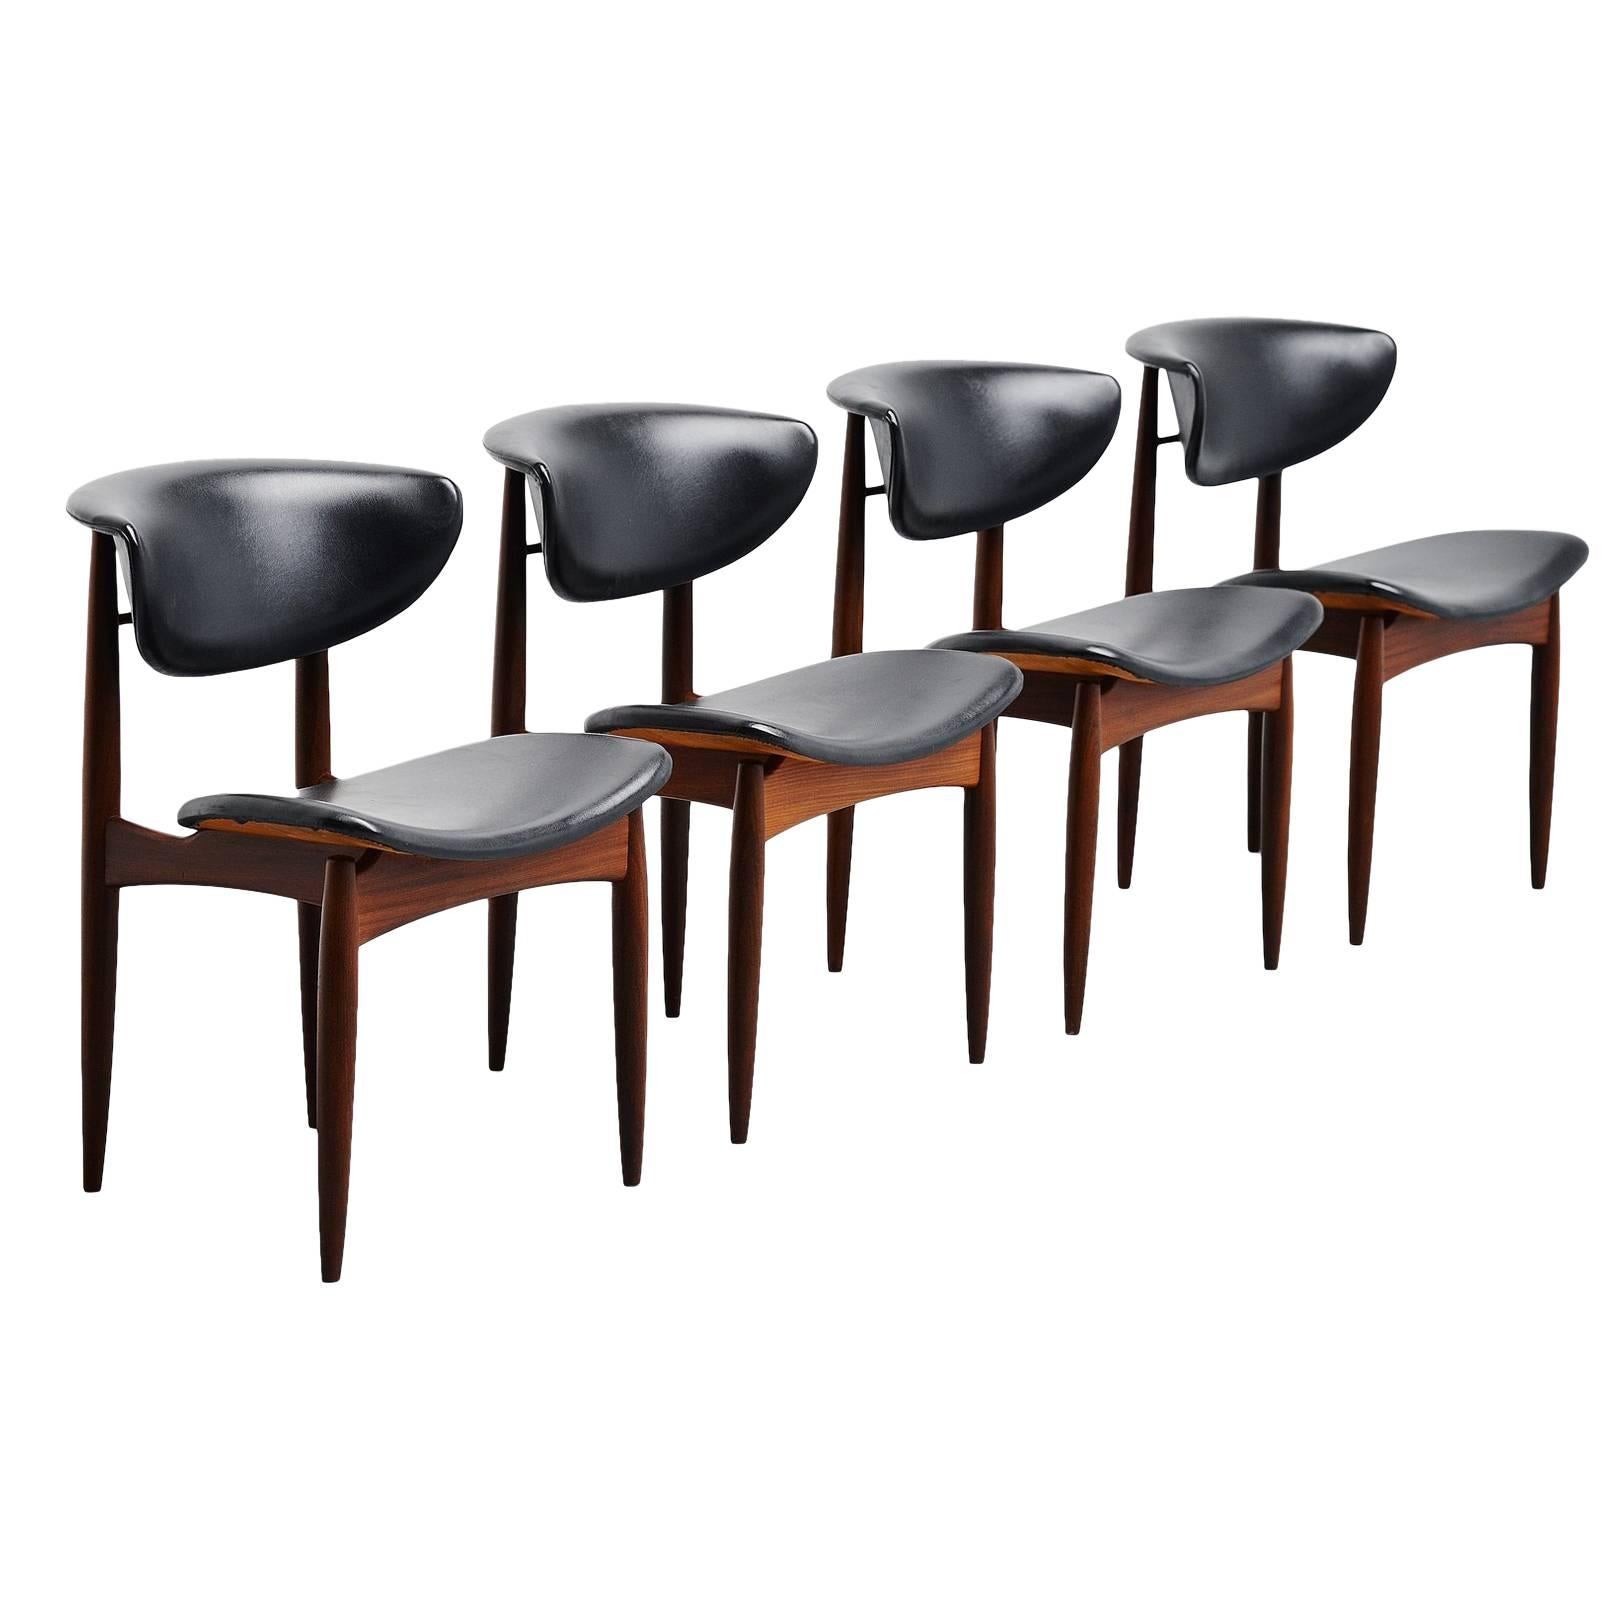 Danish Dining Chairs in Teak and Faux Leather, Denmark, 1960